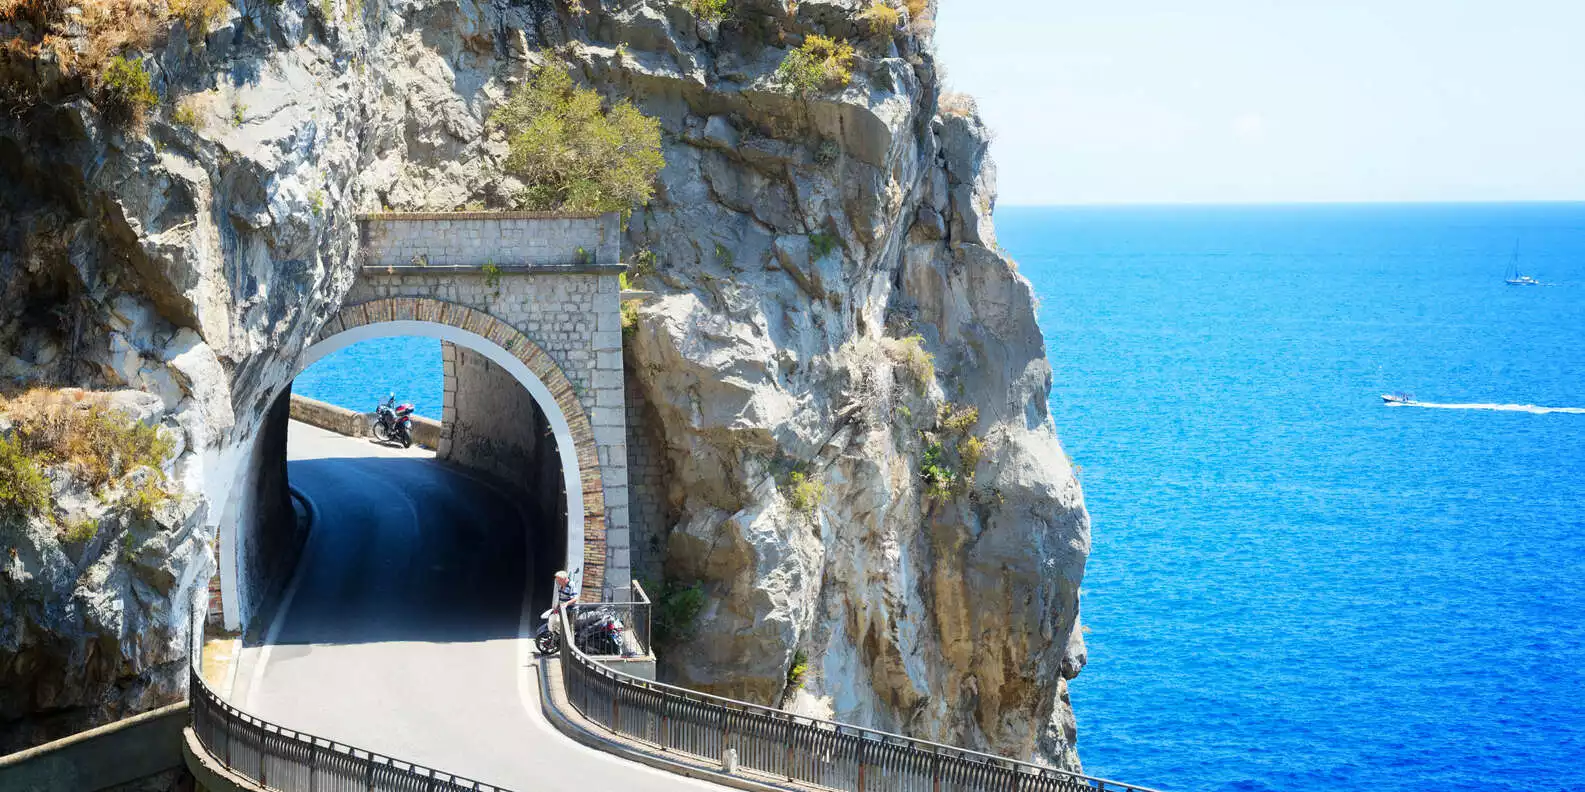 Transfer from Naples to Positano | GetYourGuide